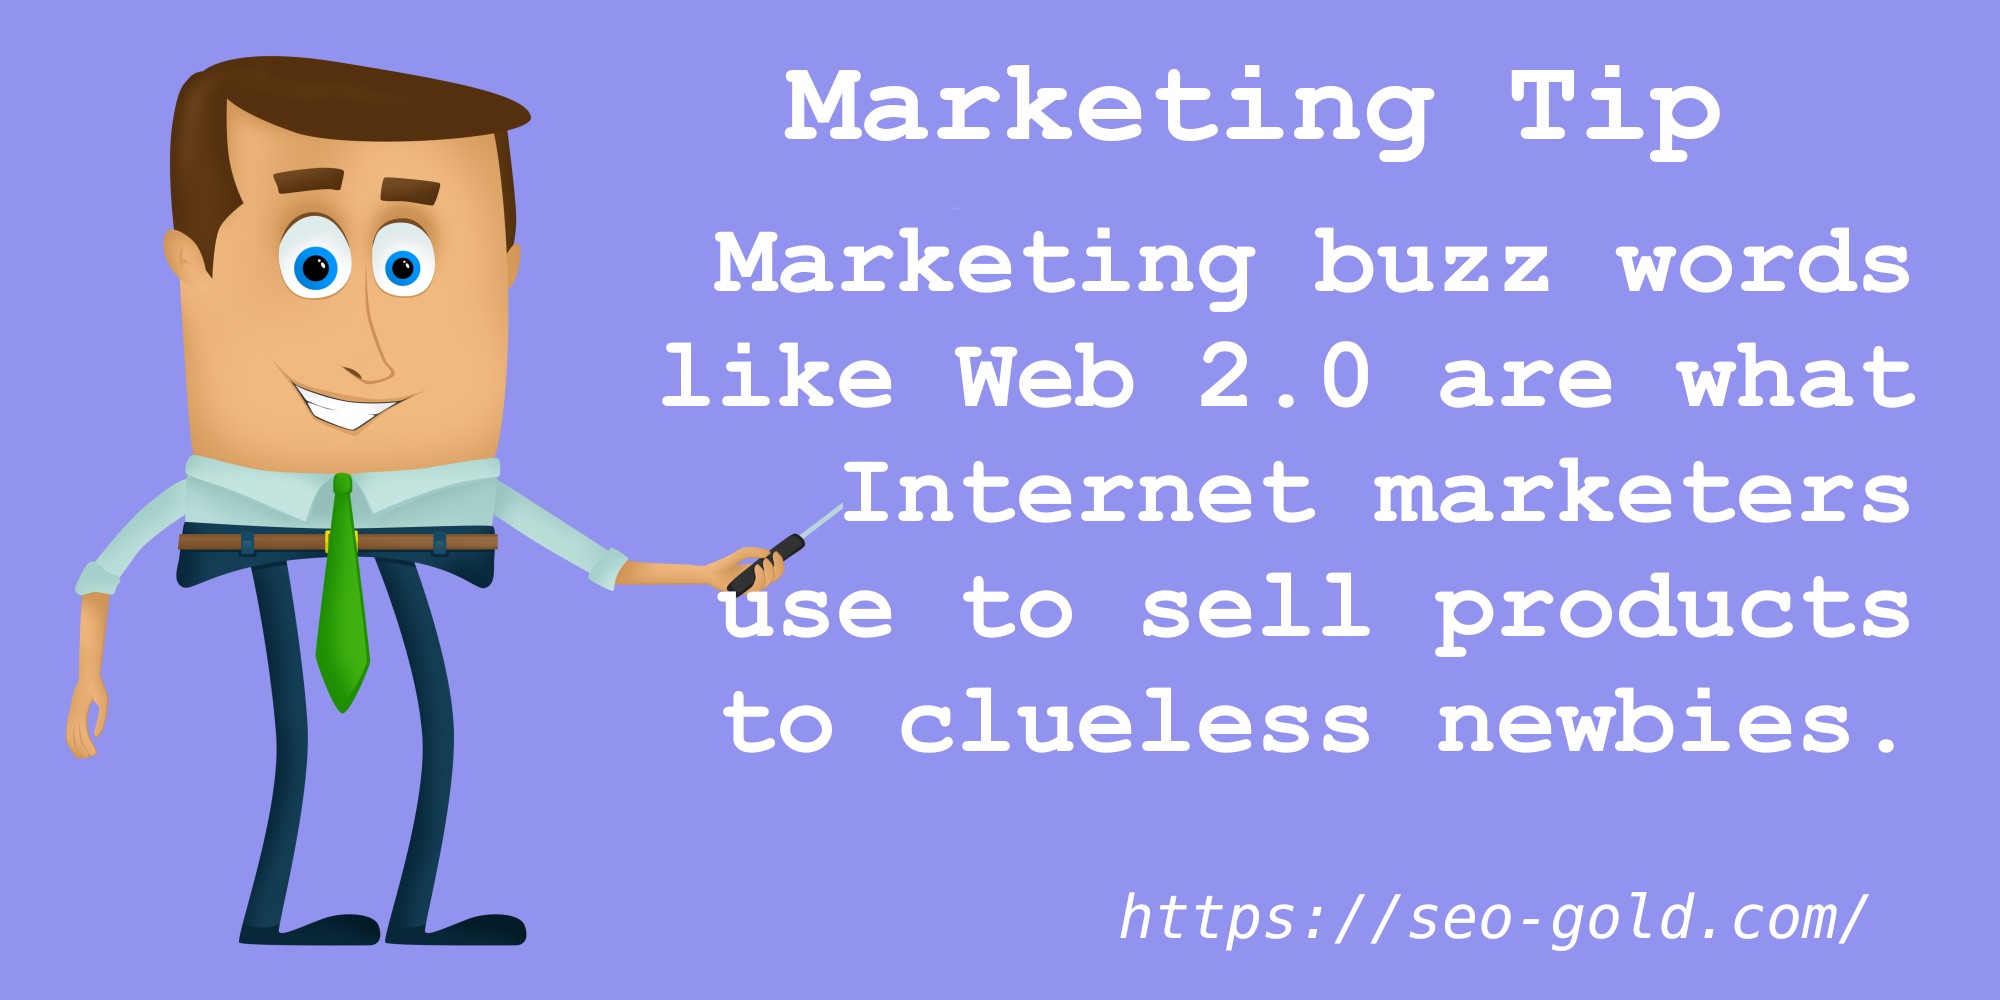 Marketing Buzz Words Are What Internet Marketers Use to Sell Products